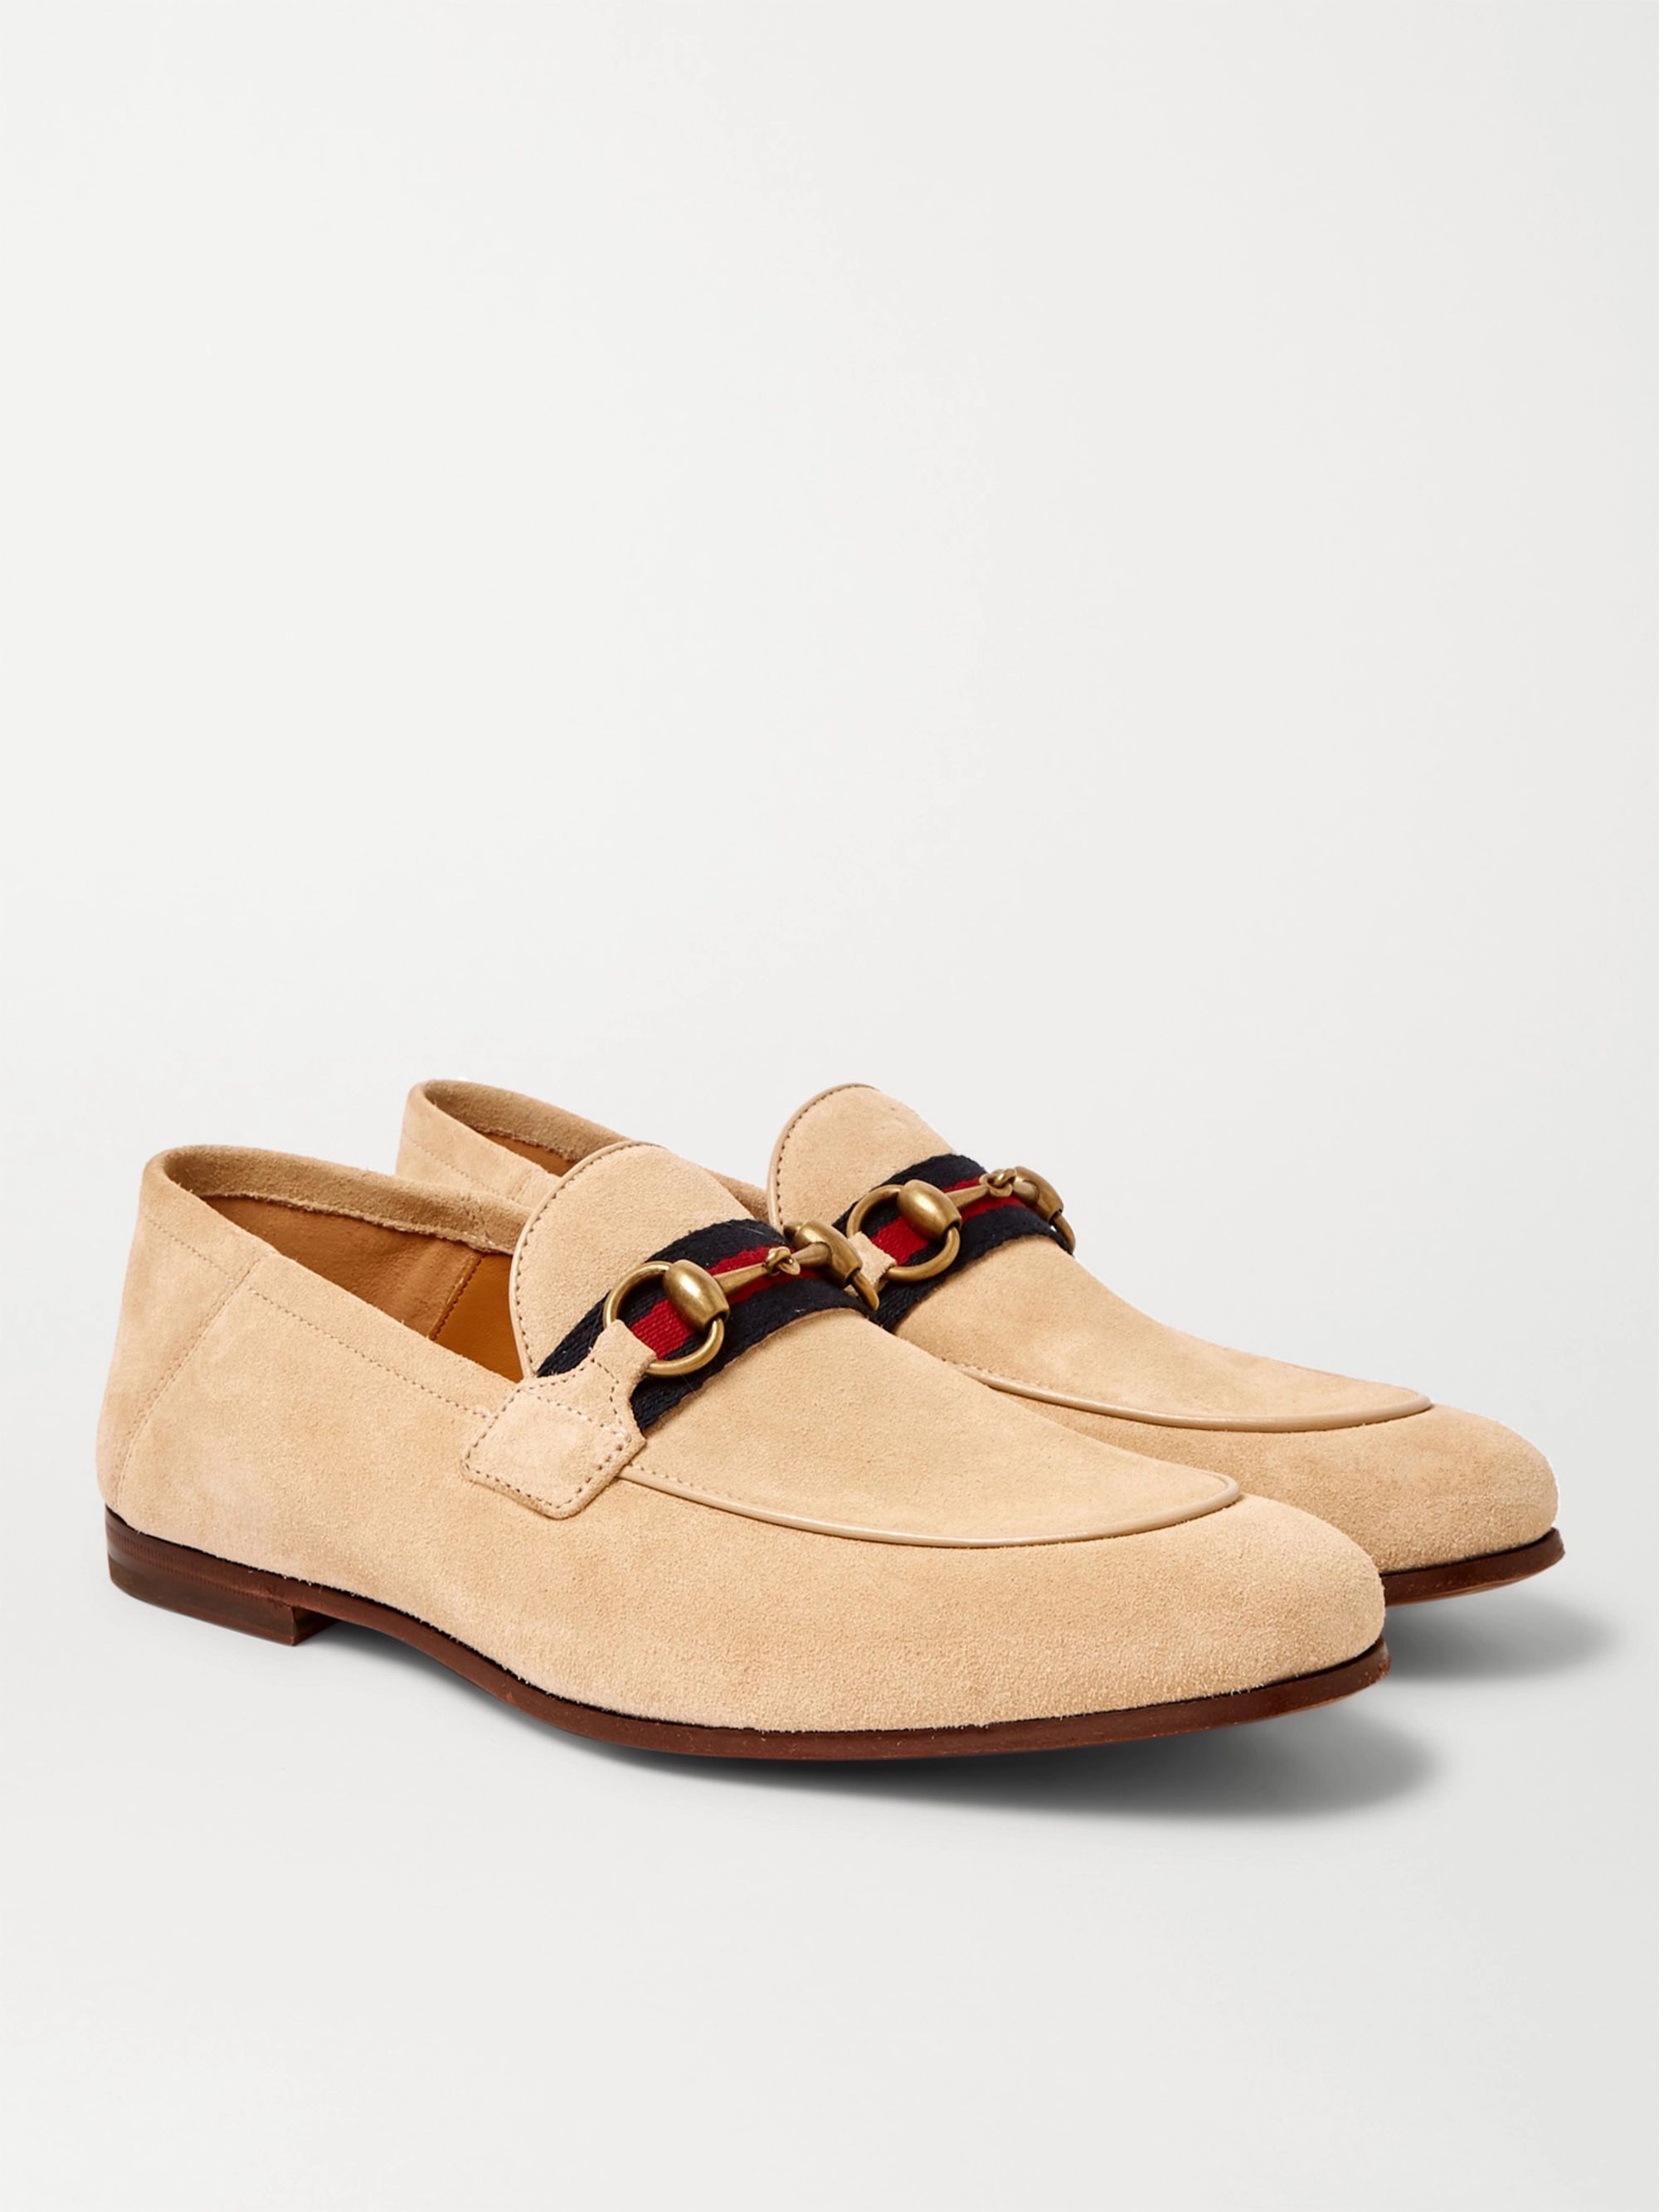 sand suede loafers